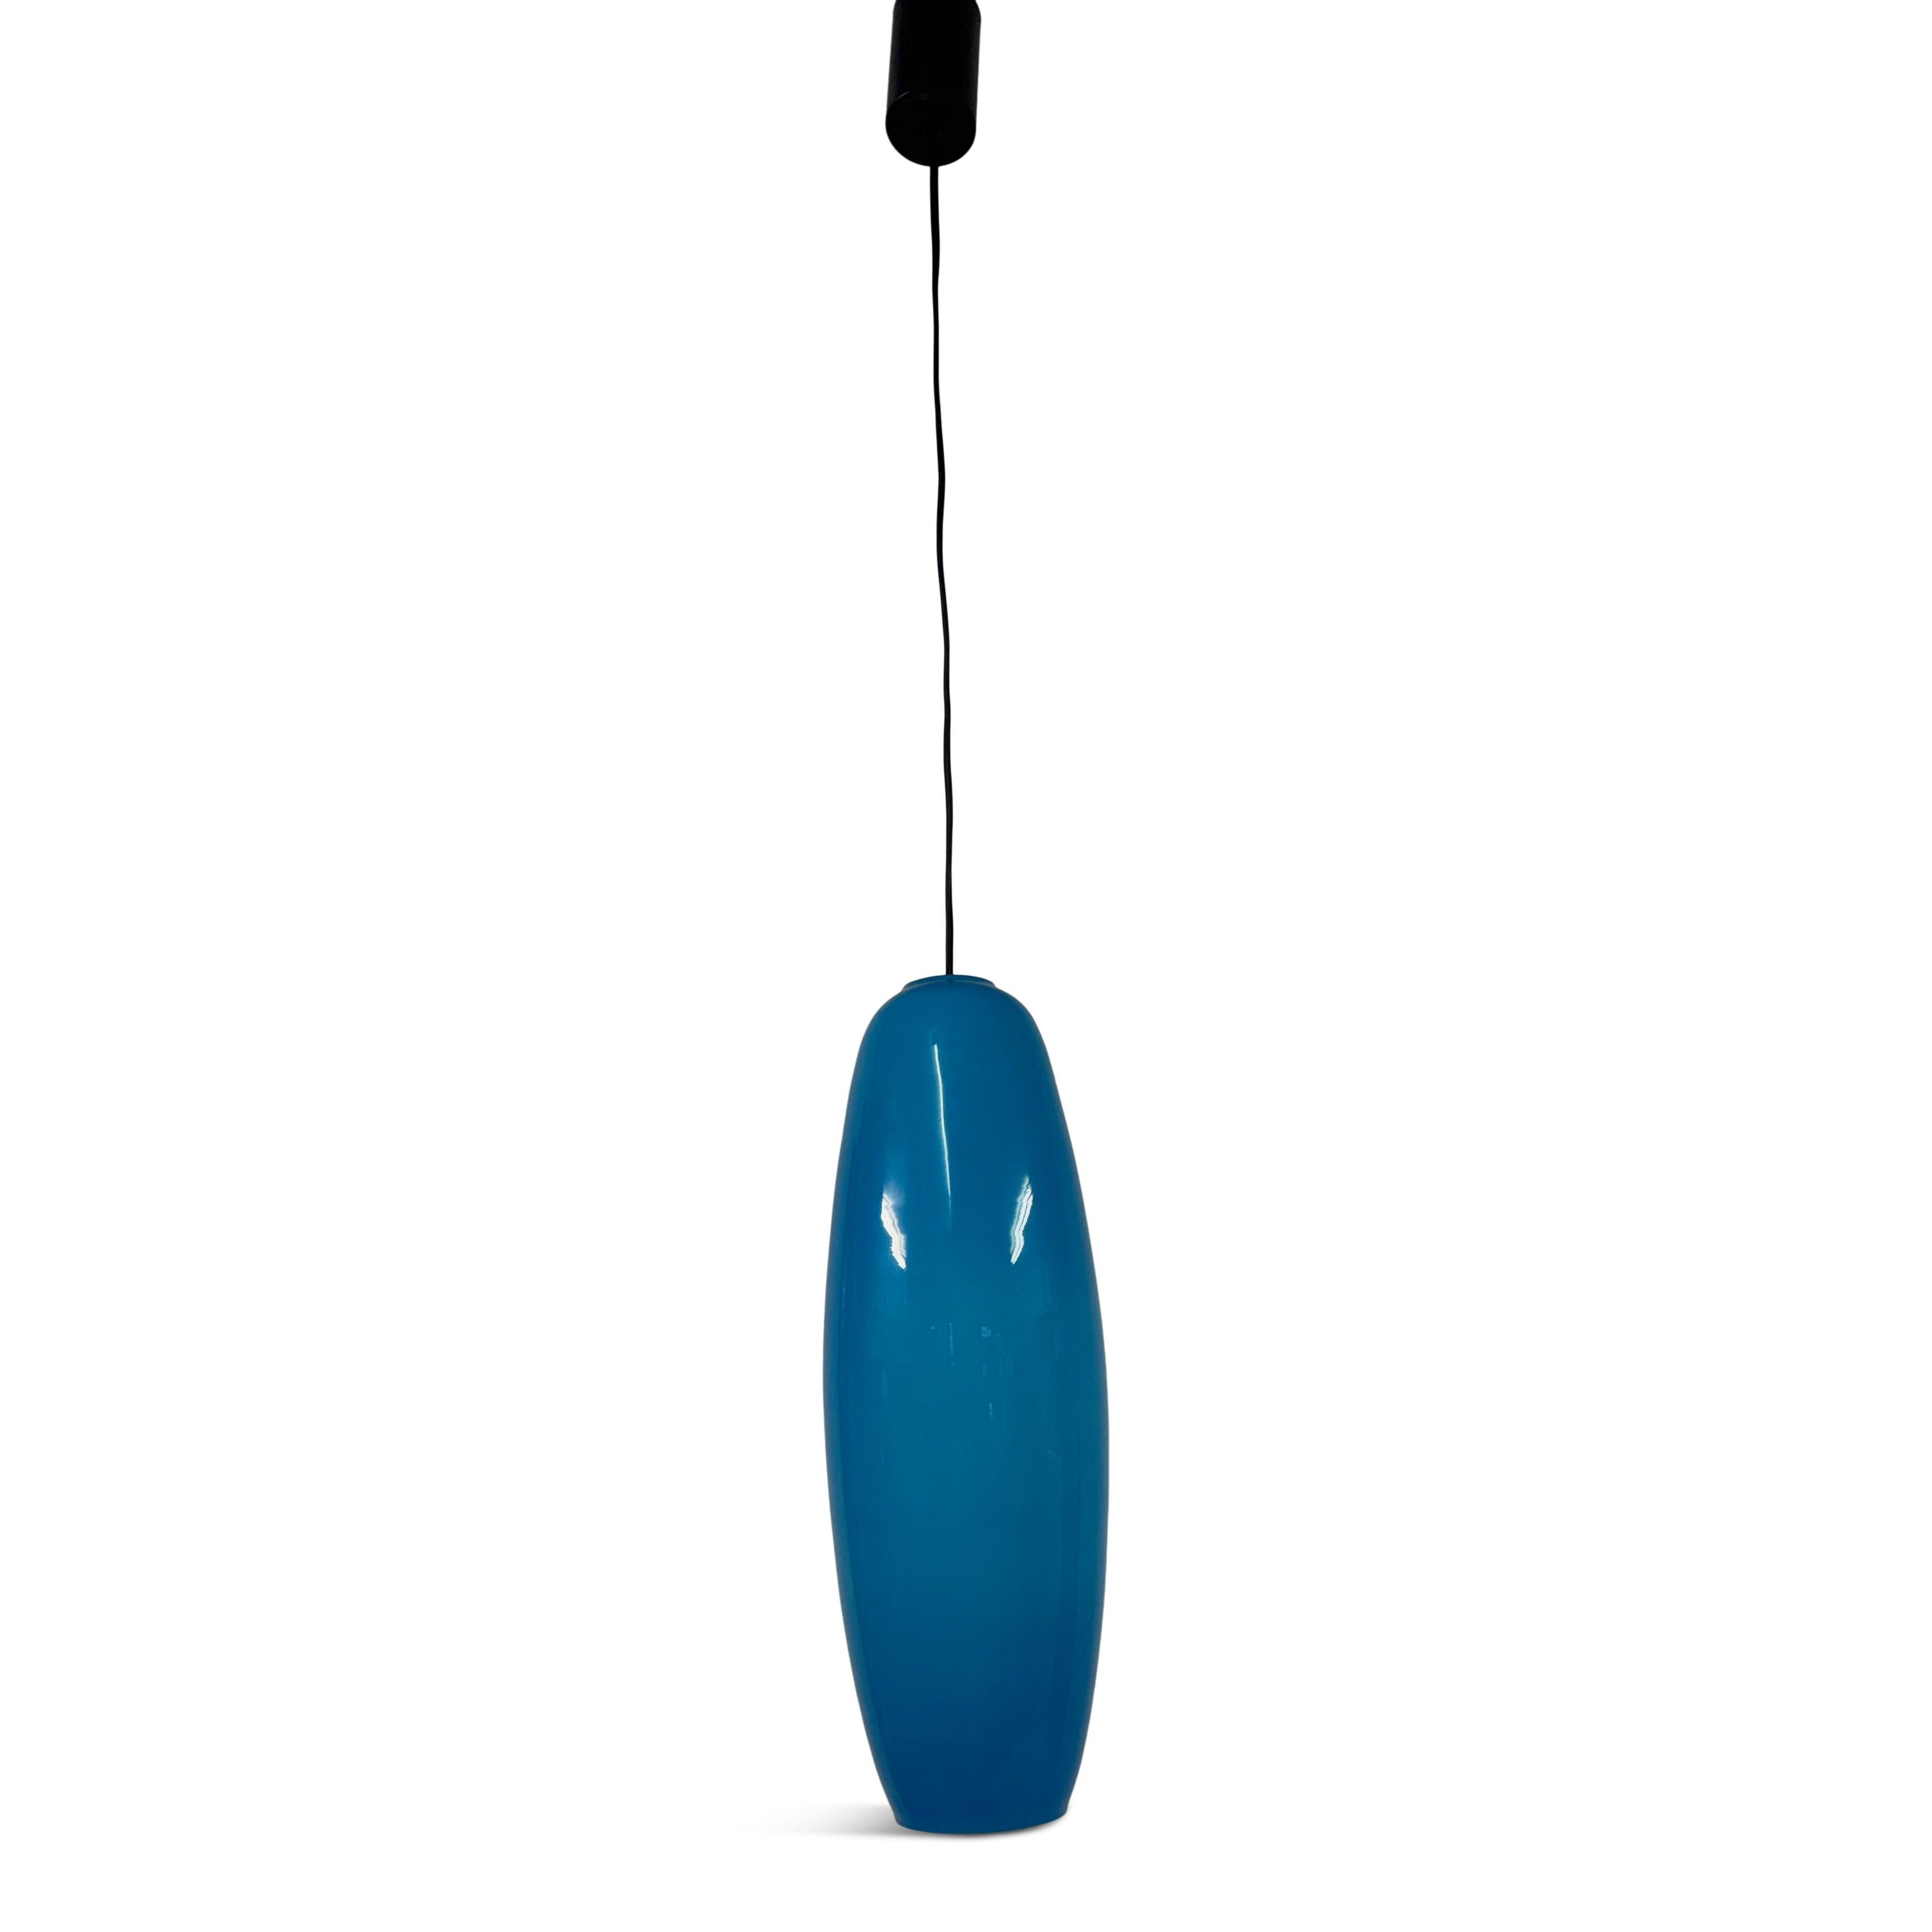 Pendant

Blue glass

Dimensions include the length of the cable which can be changed

Glass shades measures 41cm

Italy 1960s


